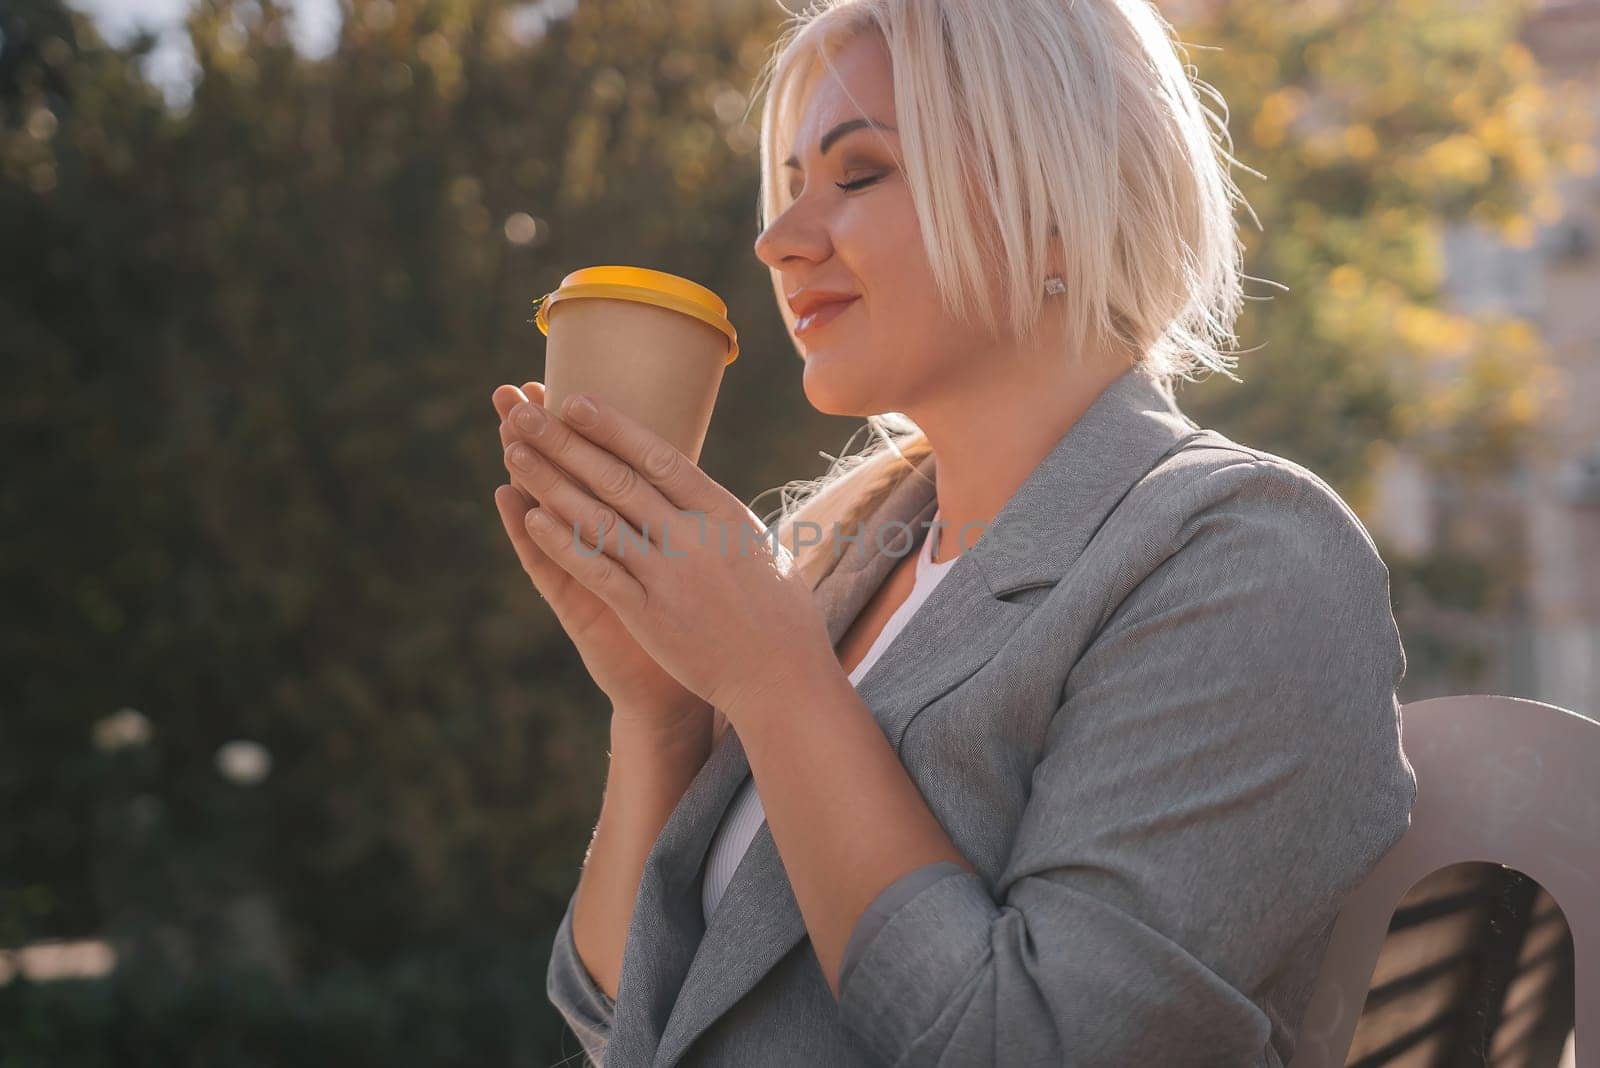 A blonde woman sits on a bench drinking coffee from a yellow cup. She is wearing a gray jacket and has her hair in a ponytail. The scene is peaceful and relaxing